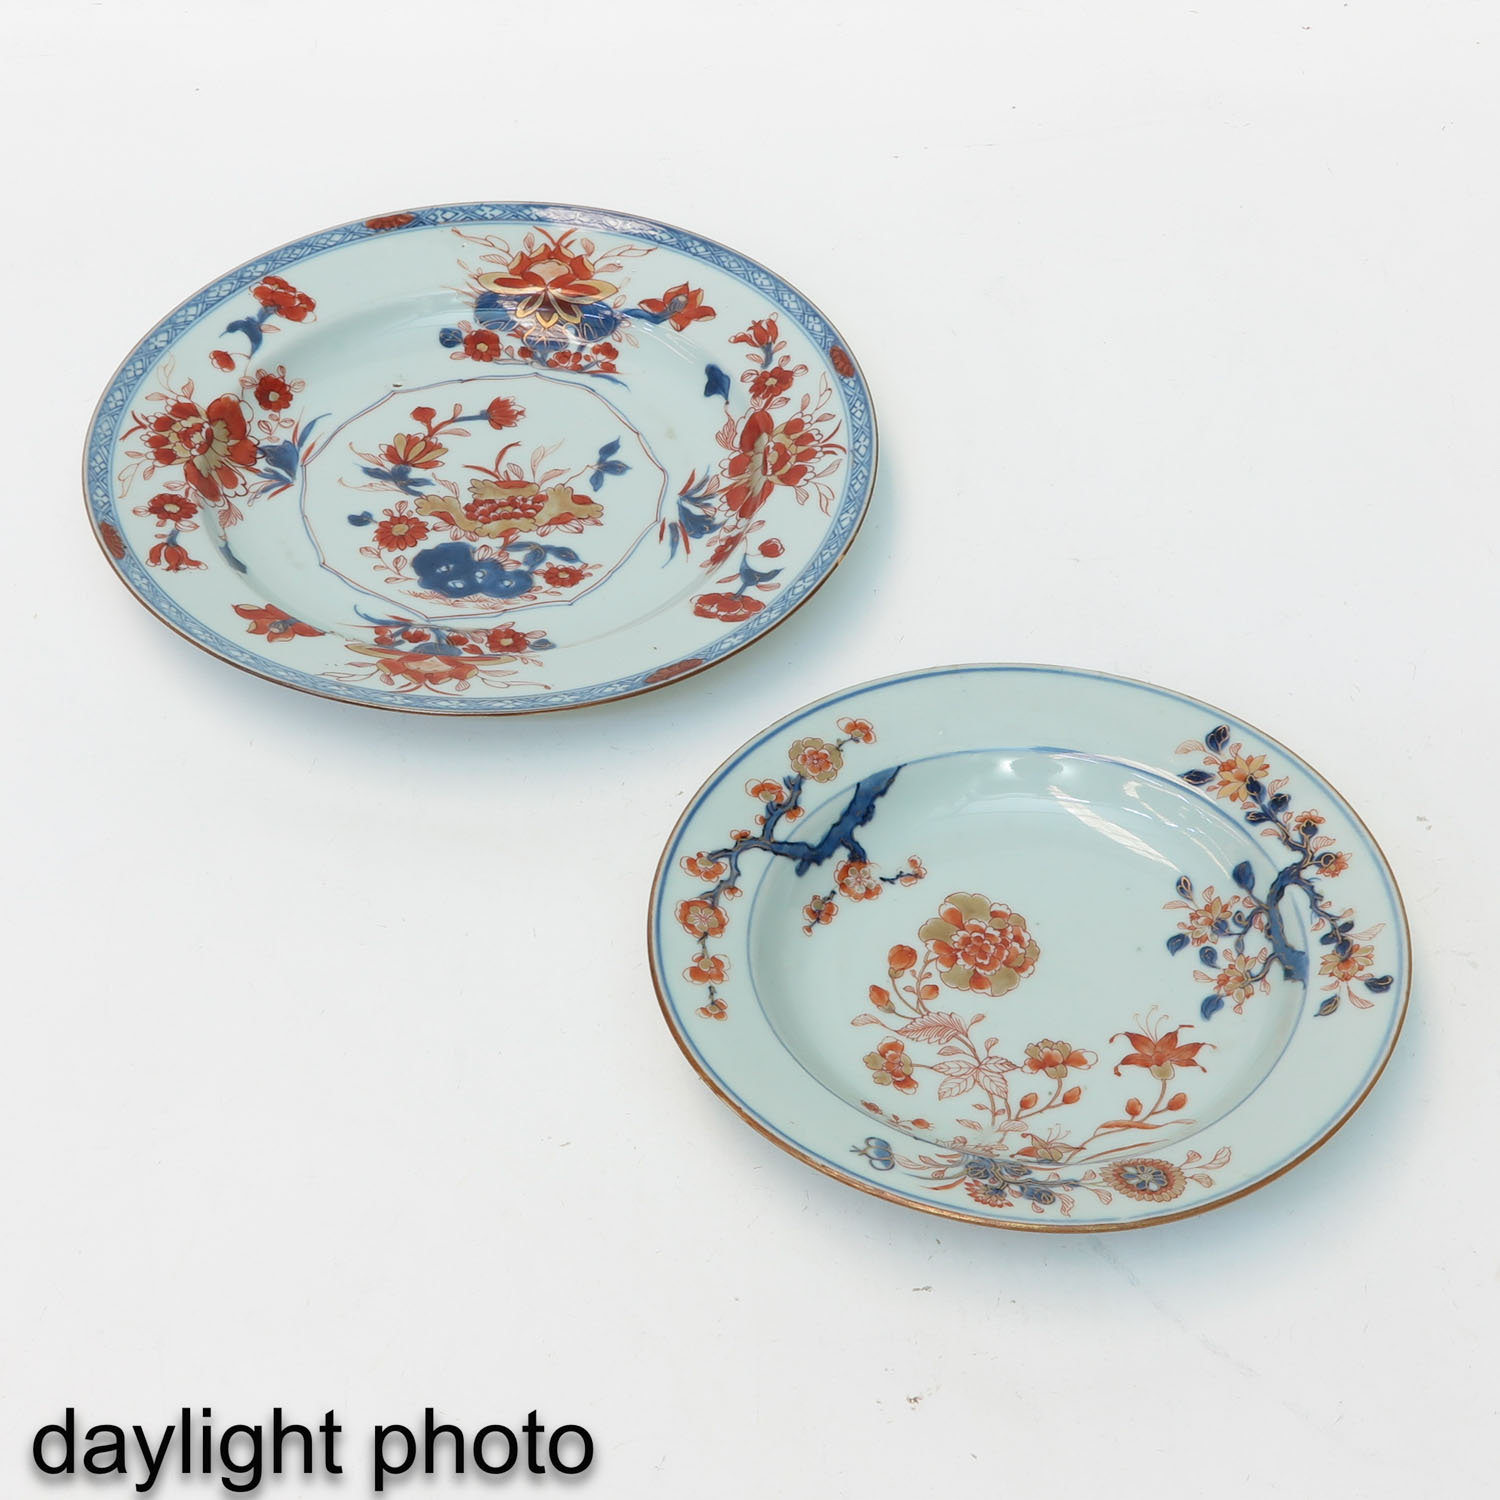 A Collection of 3 Imari Plates - Image 9 of 10